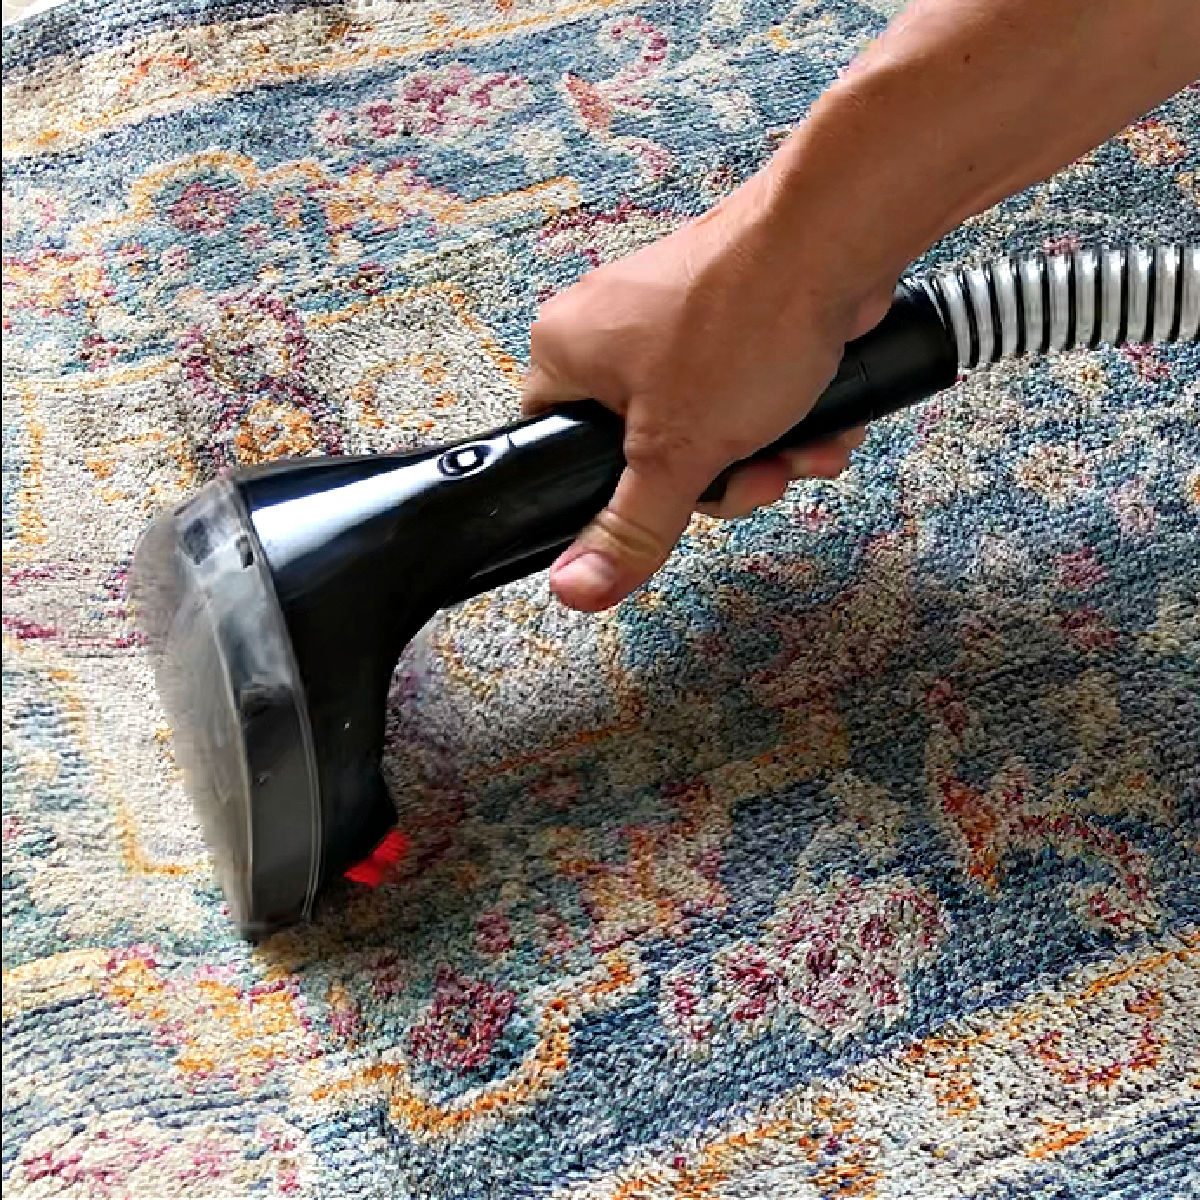 How to Clean Carpets and Rugs  DIY Carpet Cleaning Without a